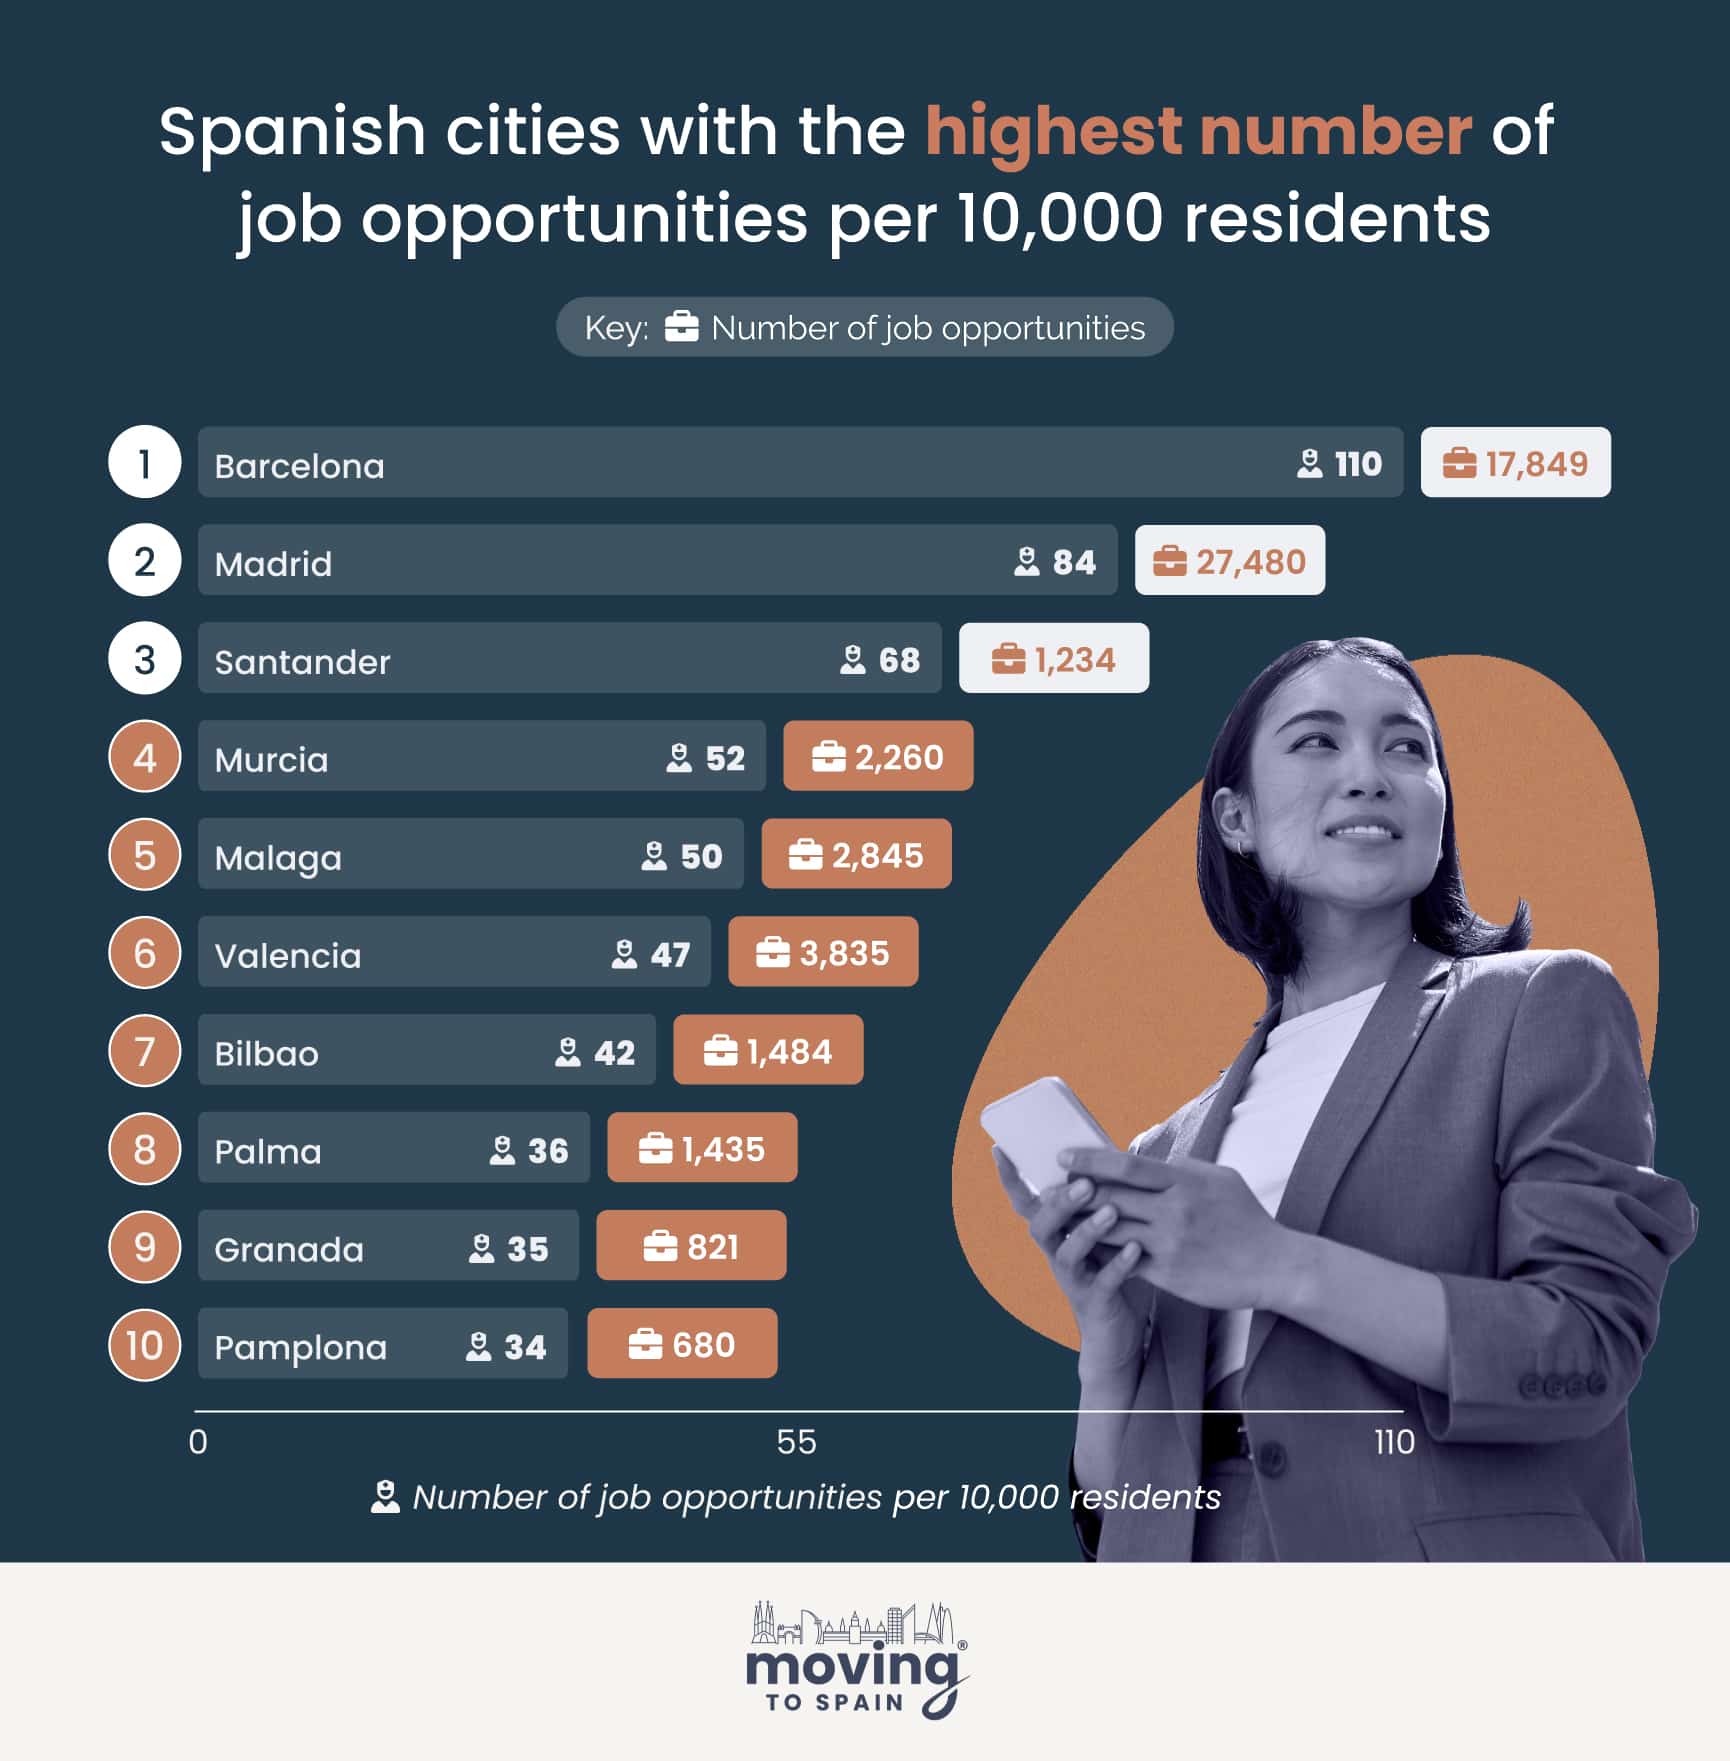 Grpah showing Spanish cities with the highest number of job opportunities per 10,000 residents